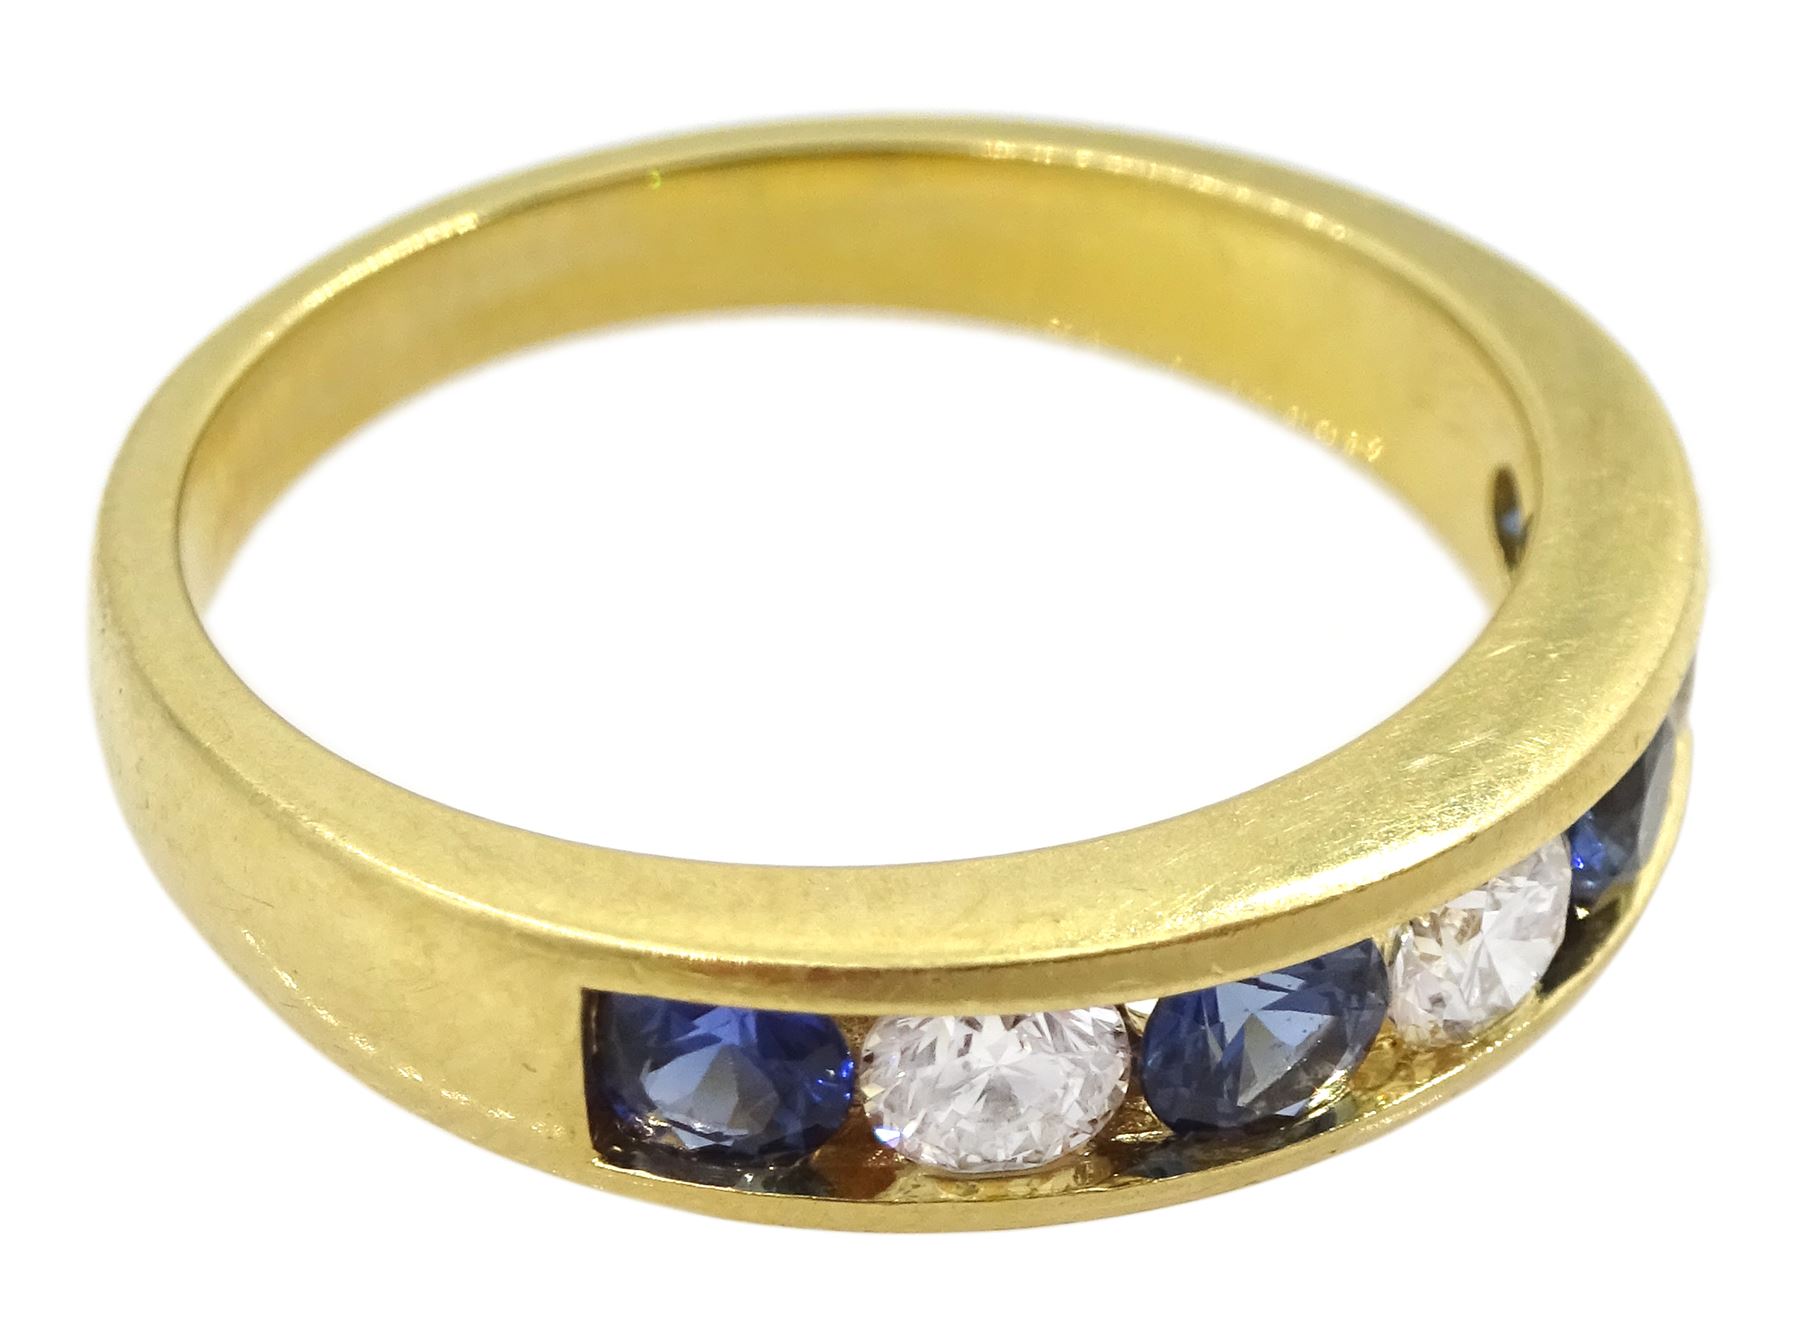 18ct gold channel set seven stone round brilliant cut diamond and round sapphire ring - Image 3 of 4